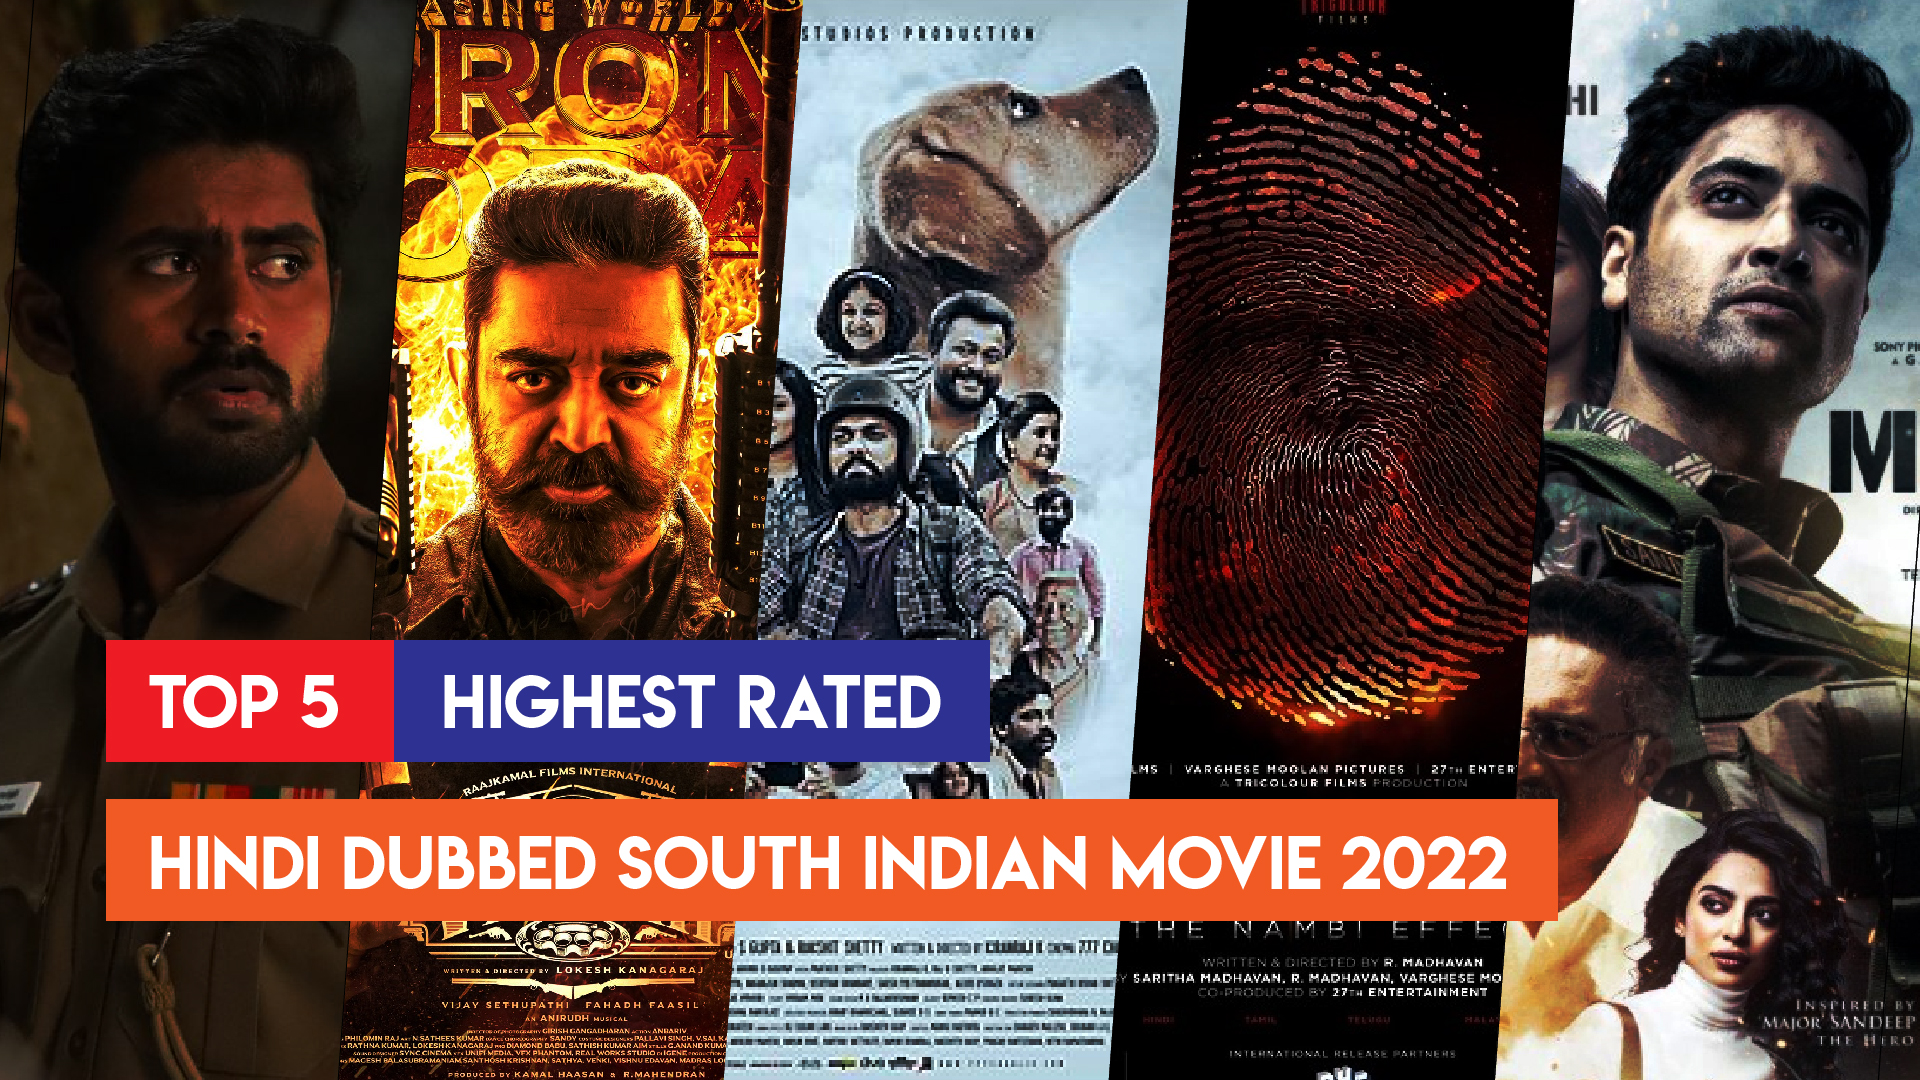 Top 5 Highest Rated South Indian Movies In Hindi Dubbed 2022 - GAURAV